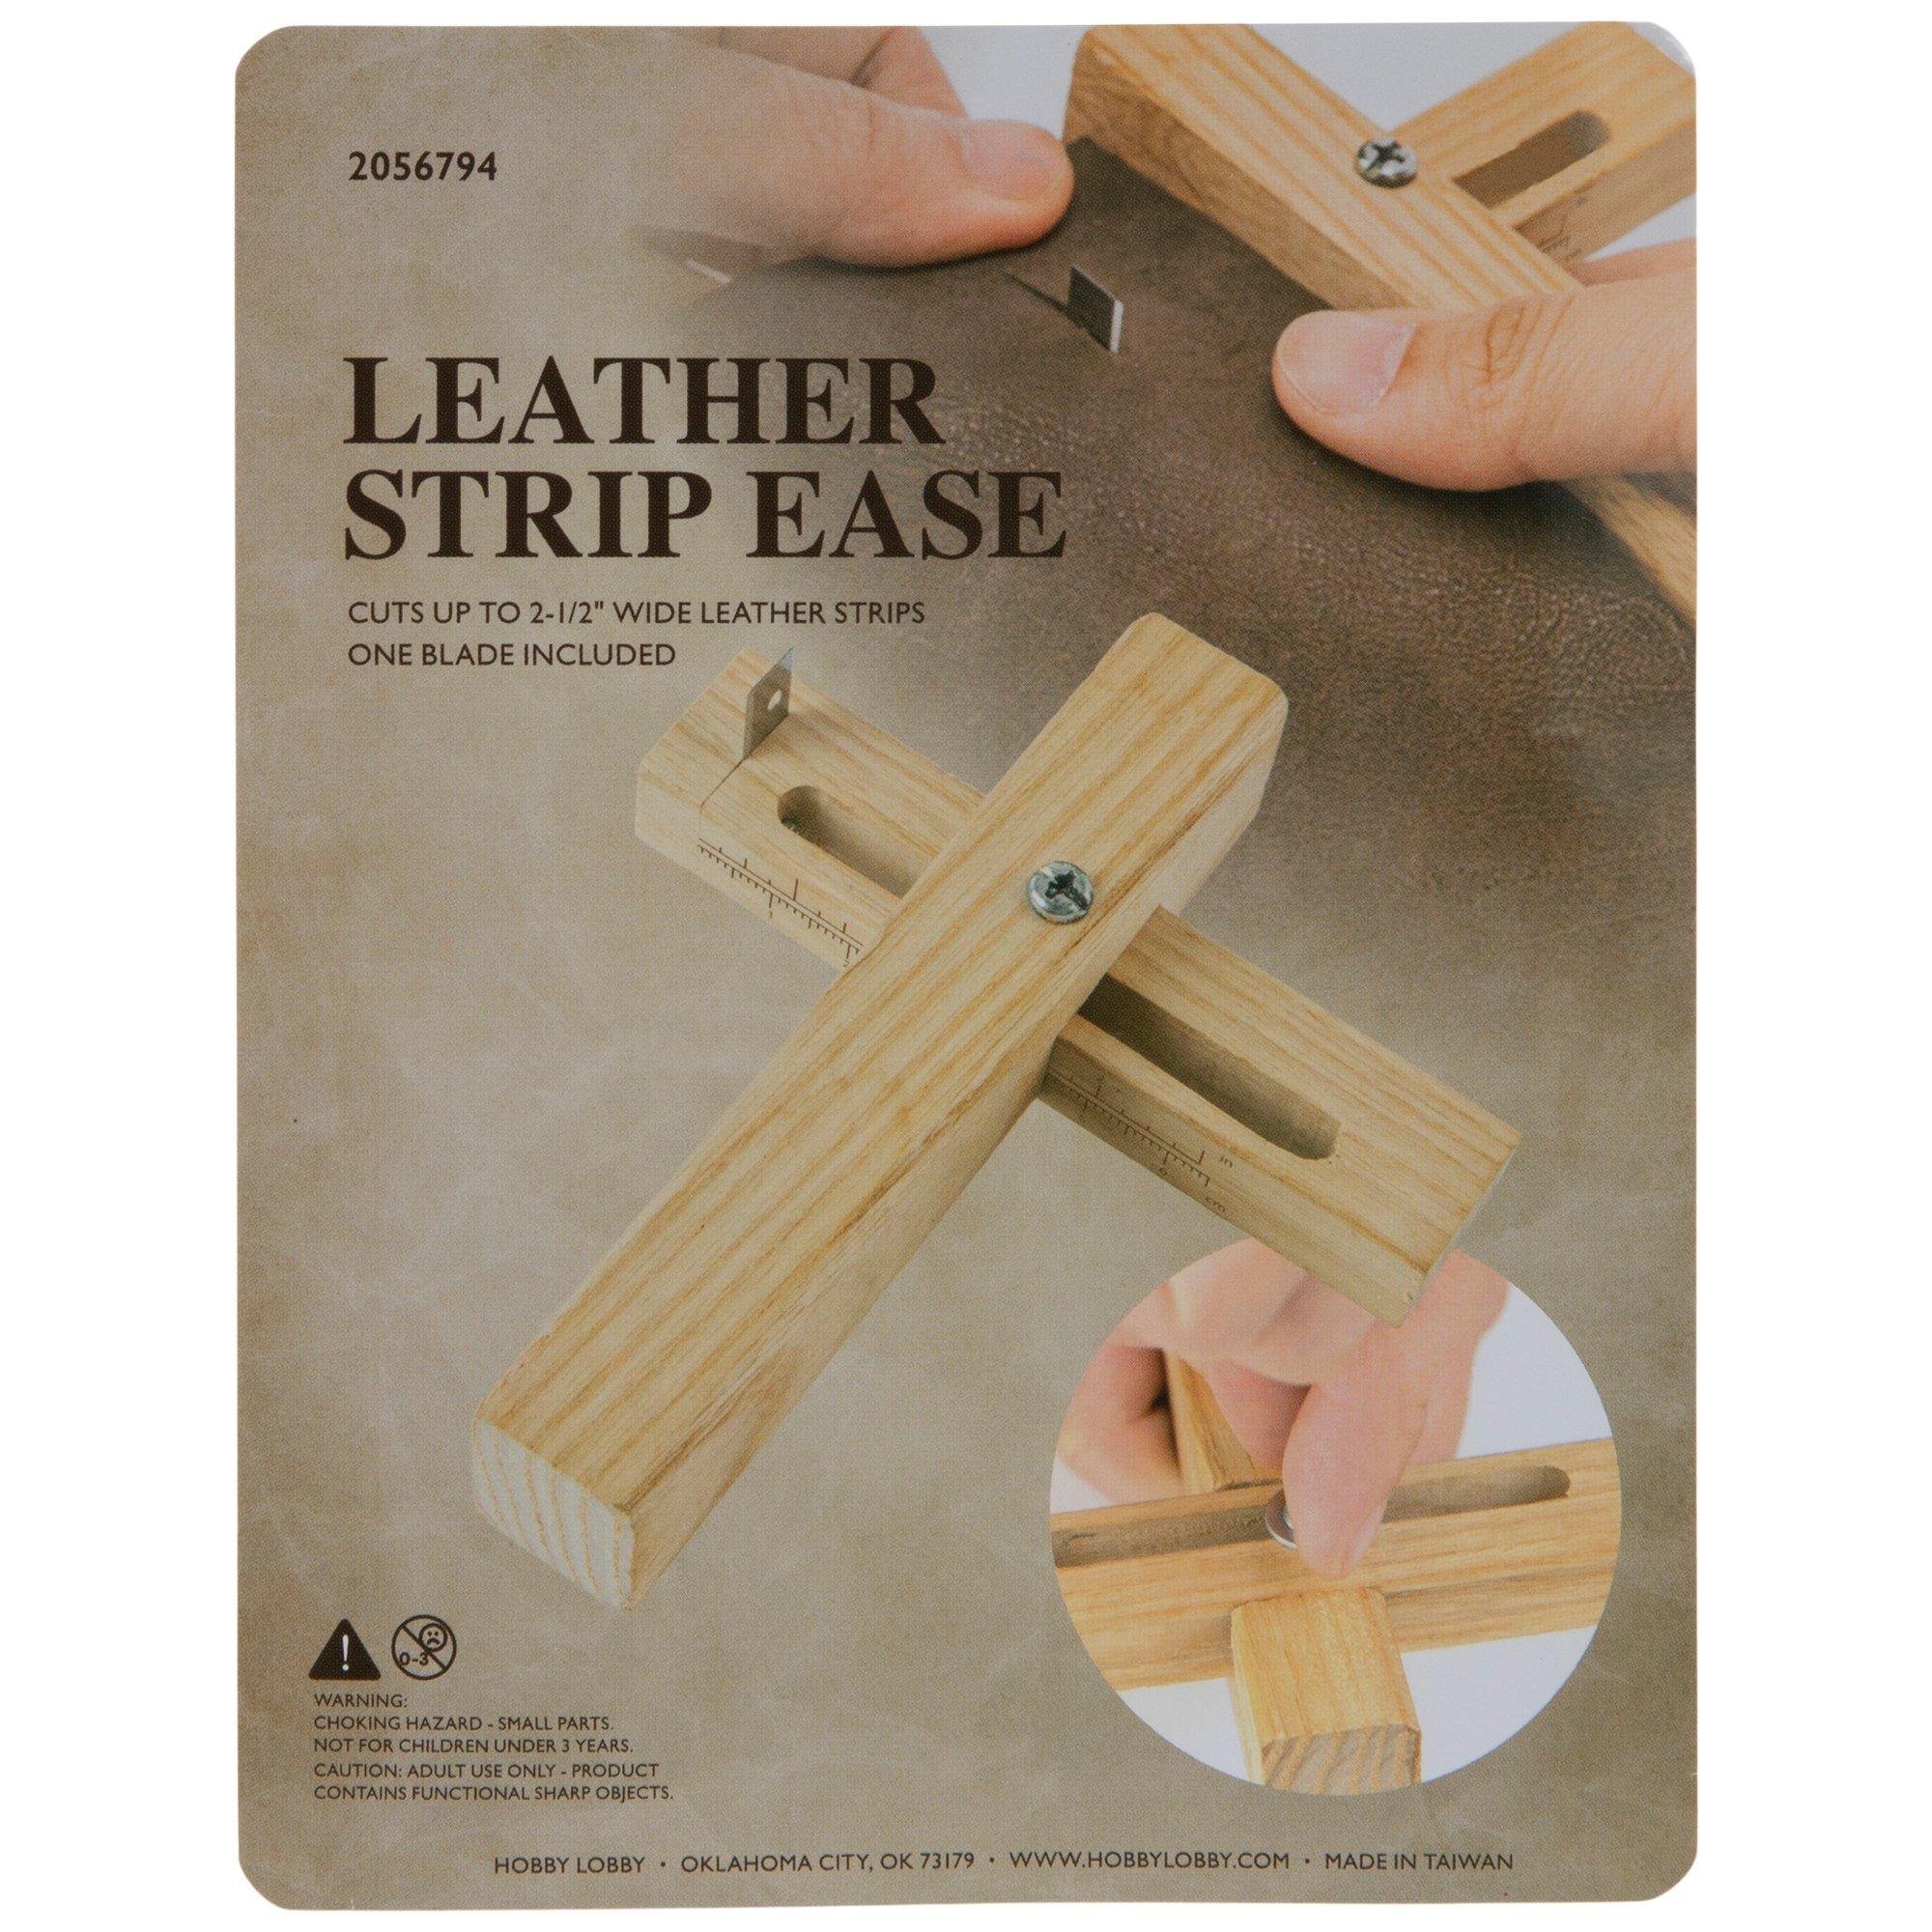 Generic Leather Strips, Shapes, & Scraps @ Best Price Online